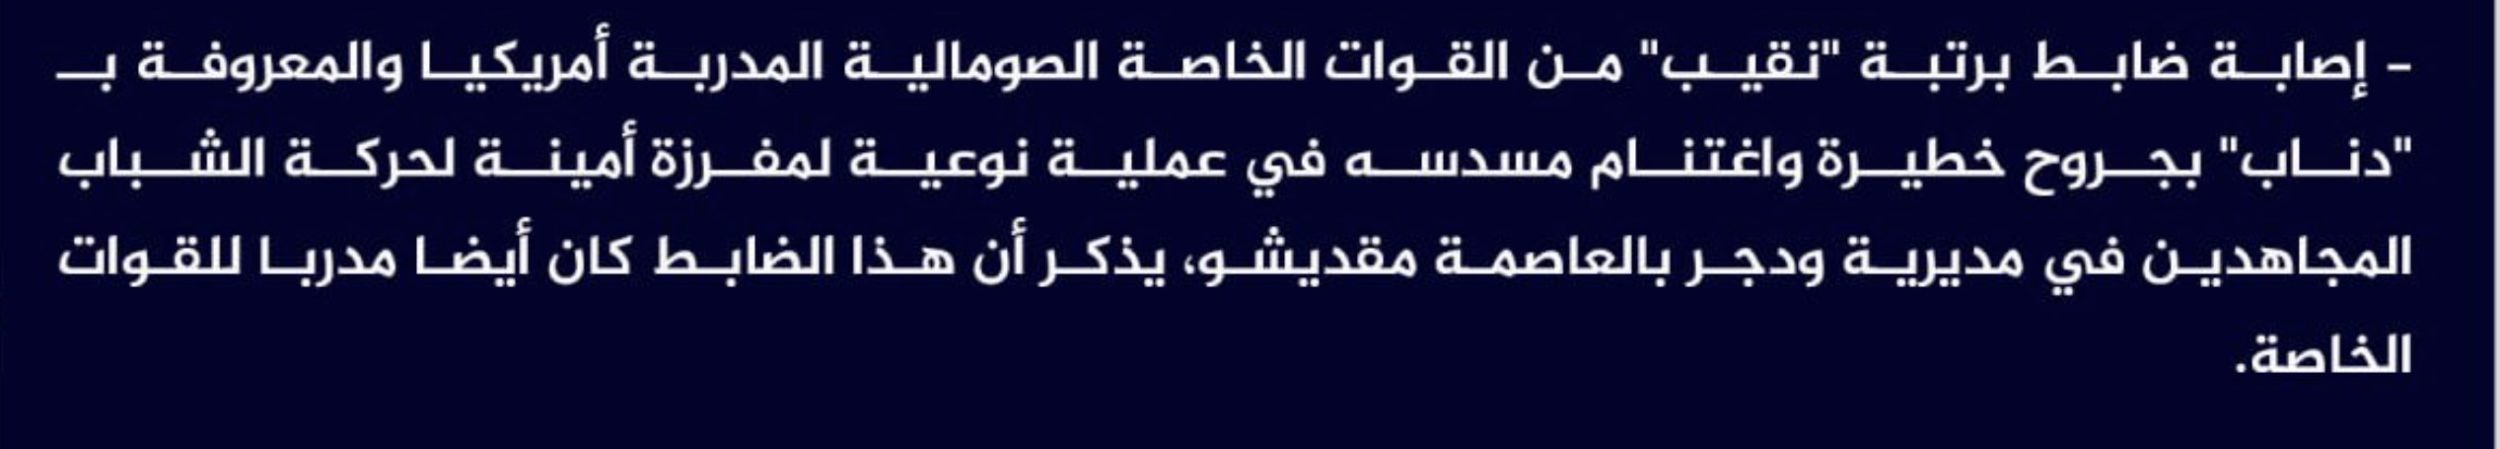 (Claim) al-Shabaab Severely Injured a Danab Special Forces Captain and Seized His Weapon in Wadajir District, Mogadishu, Somalia - 12 June 2023